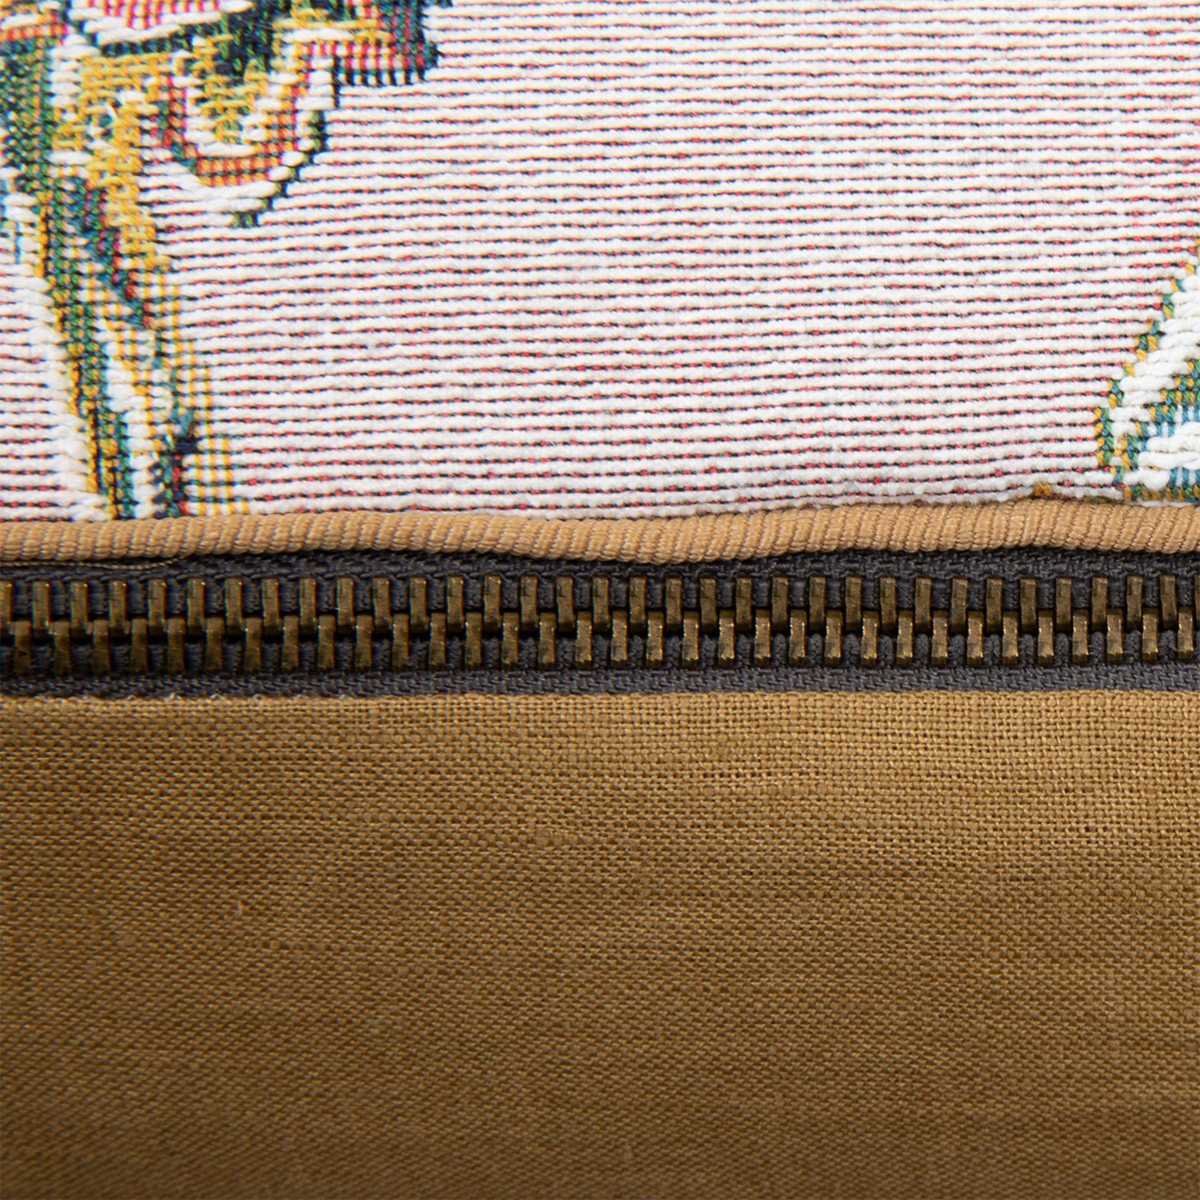 Zipper of Yves Delorme Golestan Decorative Pillow in Sienna Color